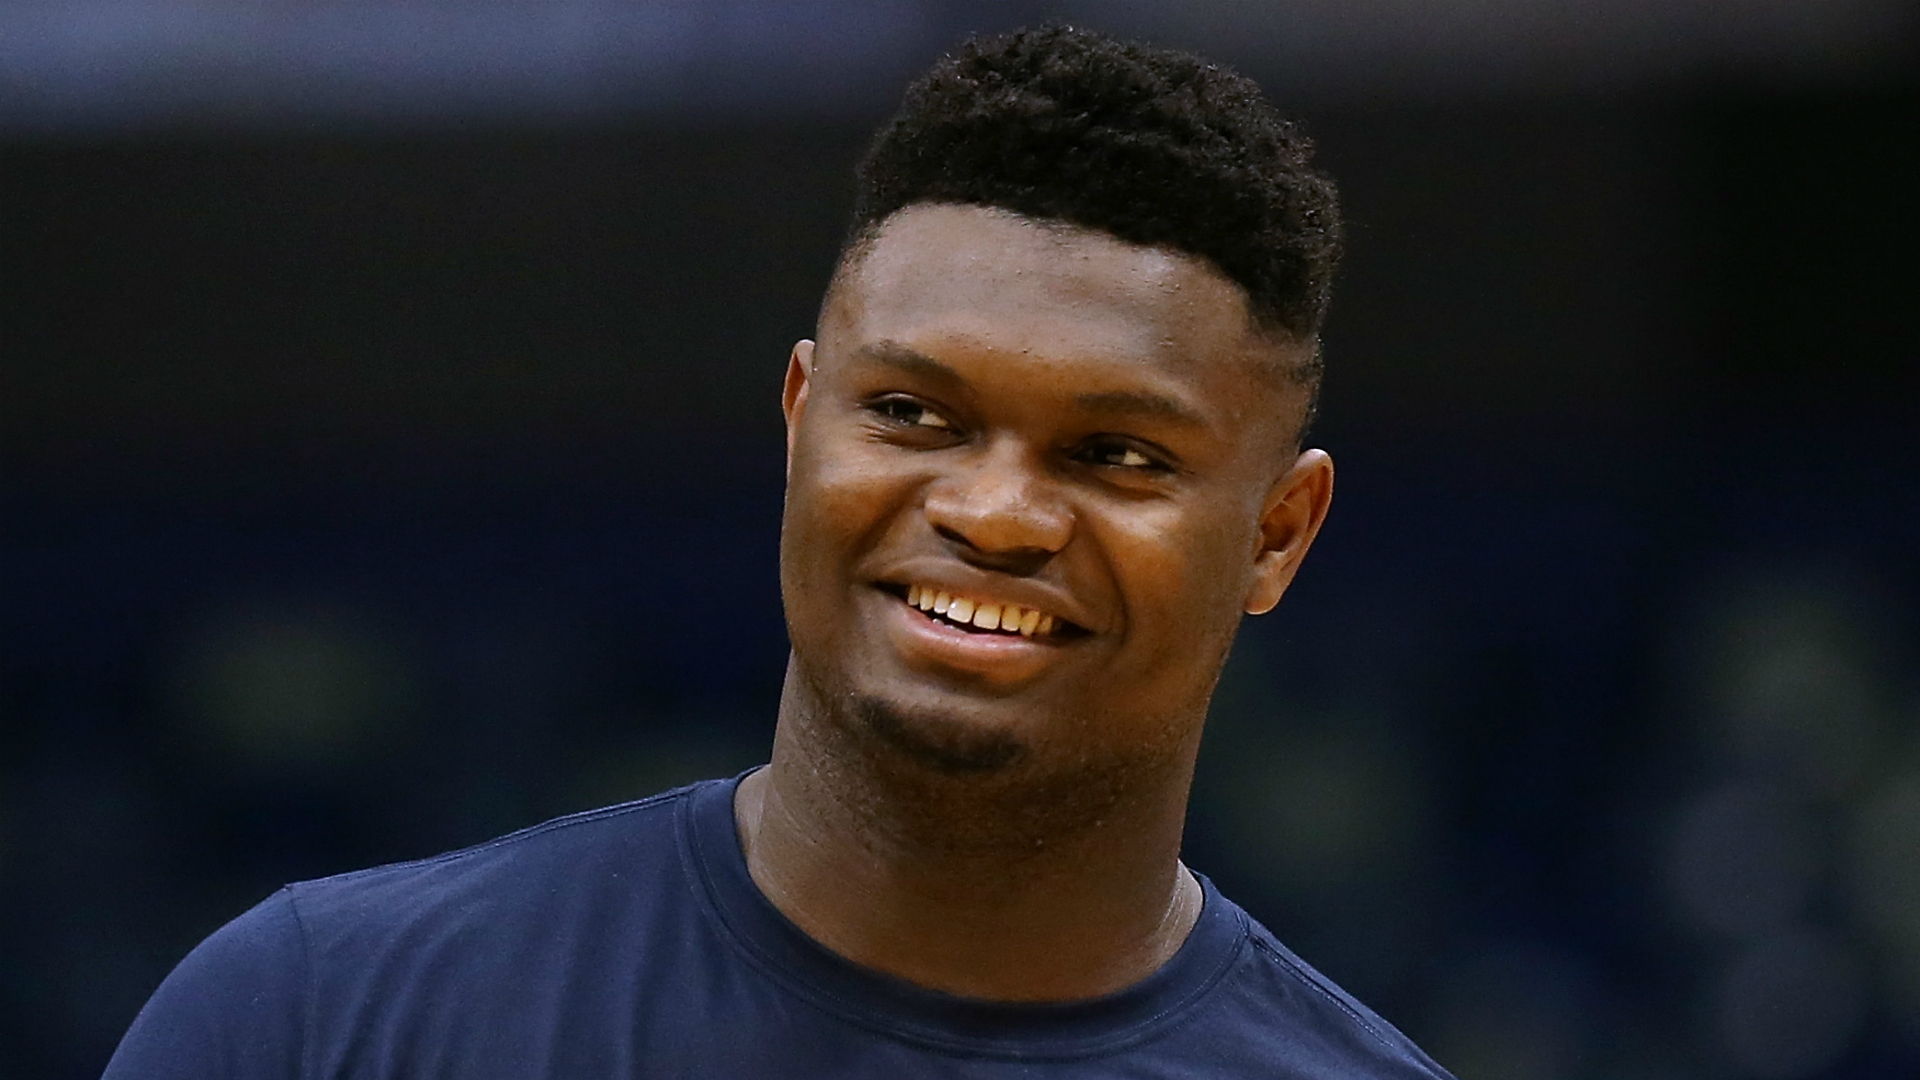 Star rookie Zion Williamson is putting together a dominant run for the New Orleans Pelicans, and he was delighted to learn of one statistic.